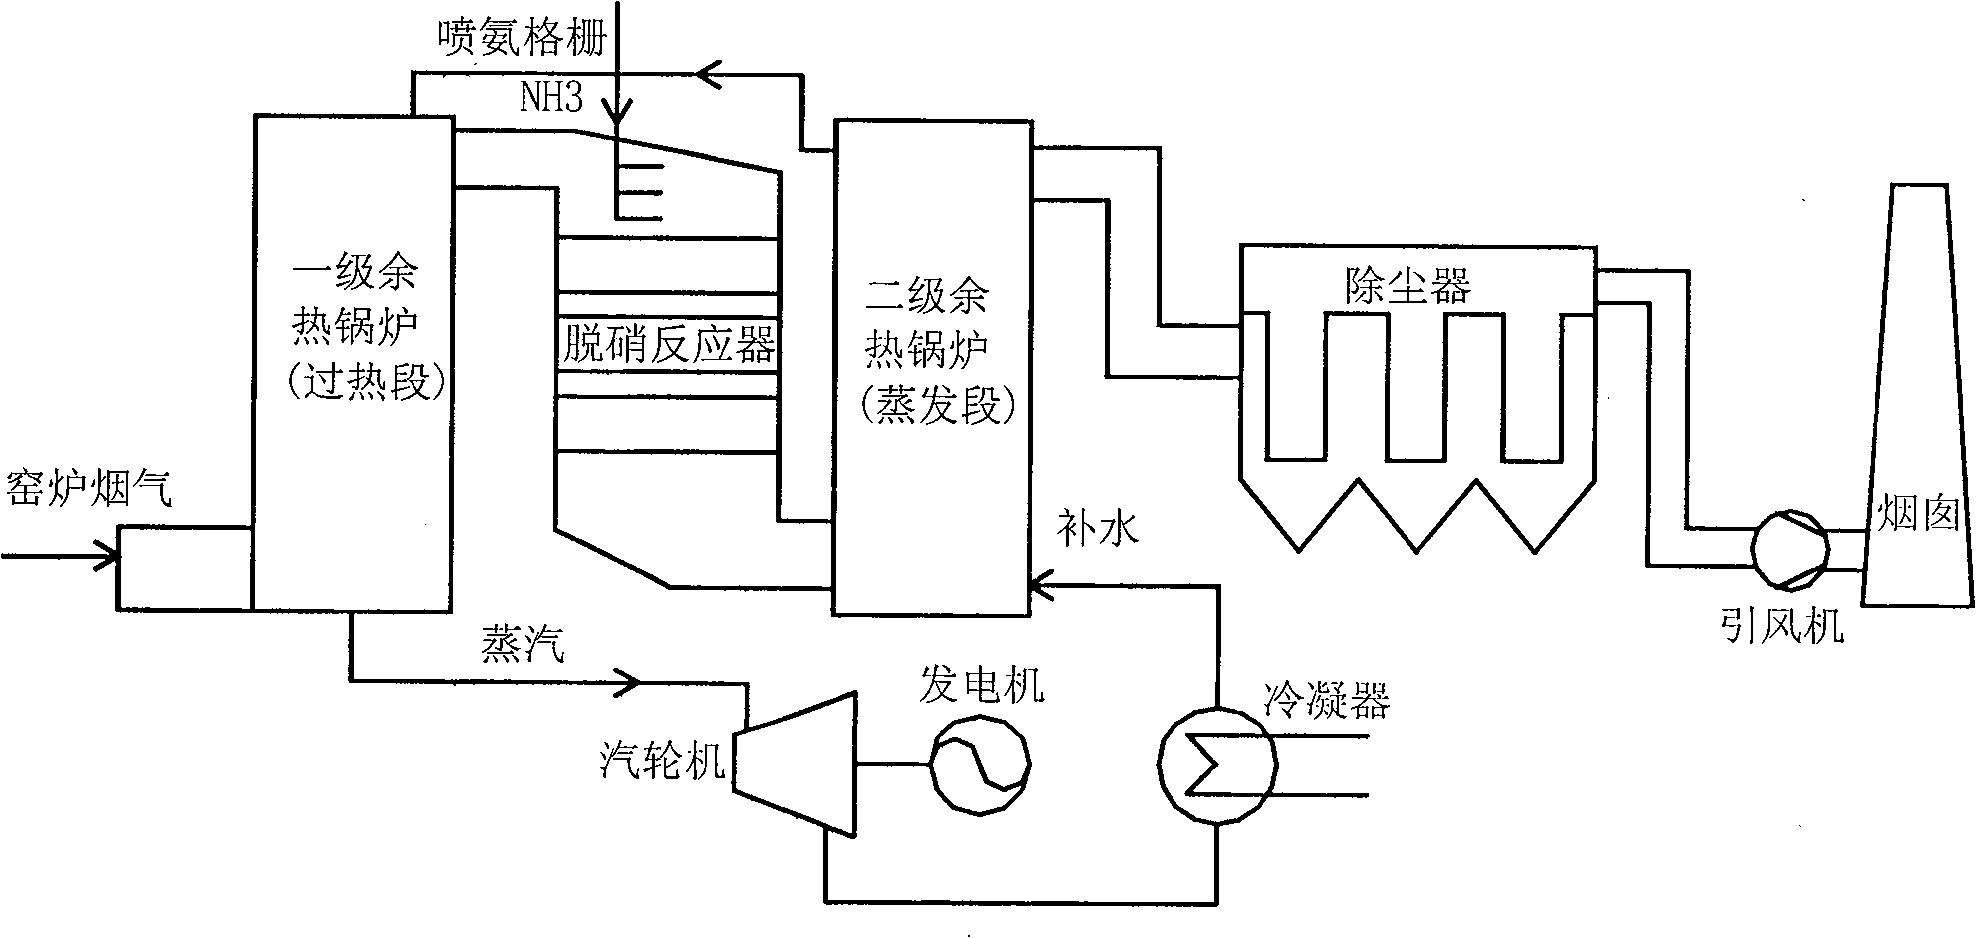 Power-generation and denitrification integrated device by residual heat of glass furnace and method thereof